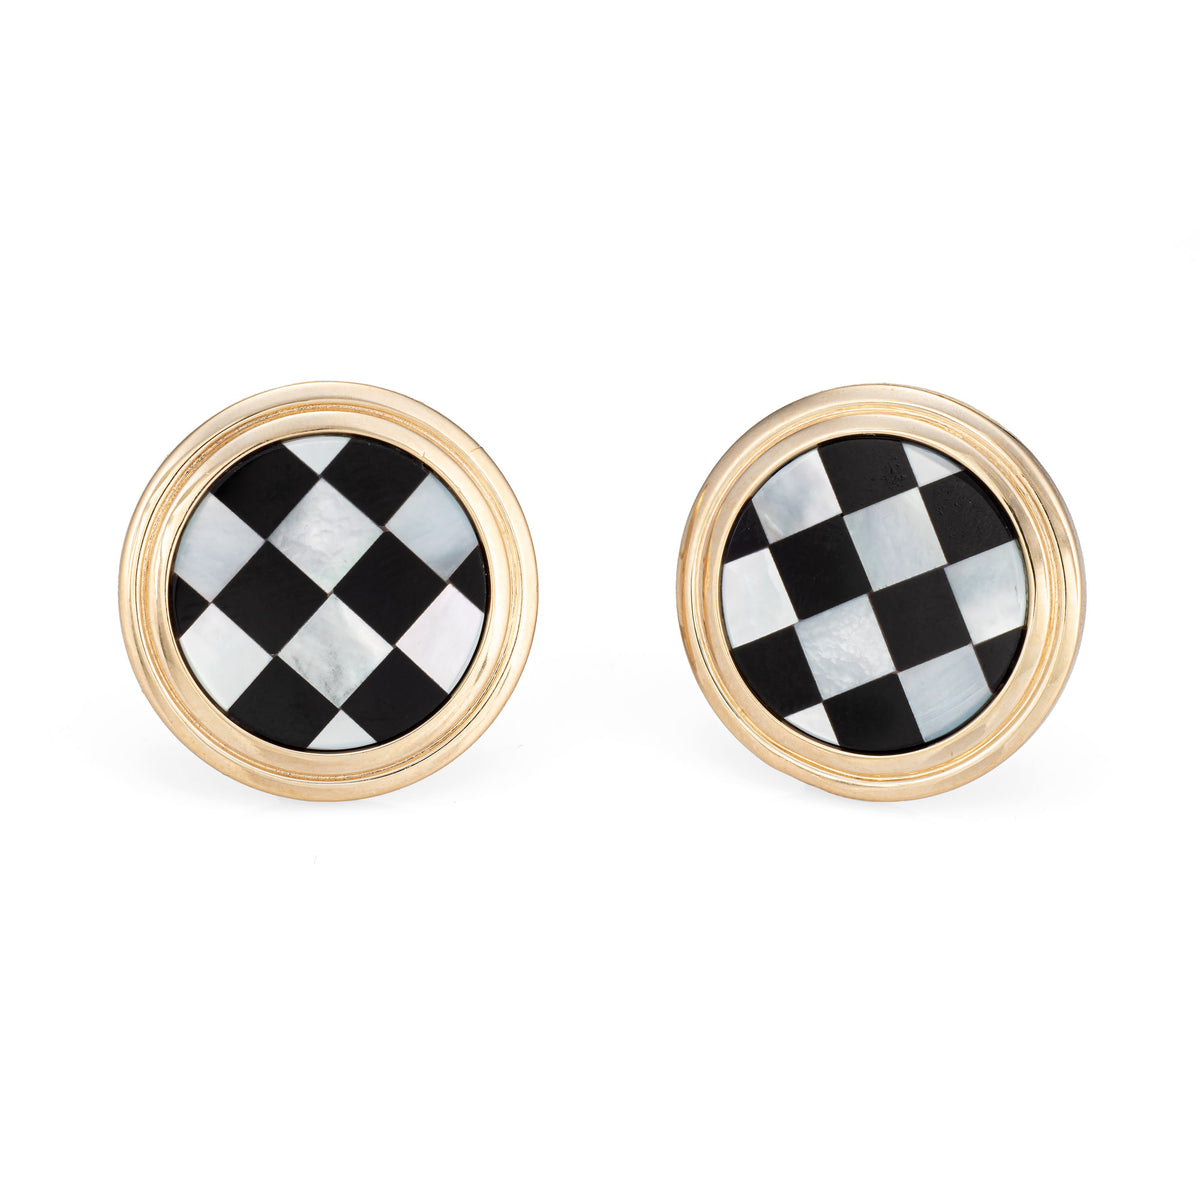 Vintage Checkerboard Earrings Larter & Sons Inlaid Onyx Mop 14K Yellow Gold